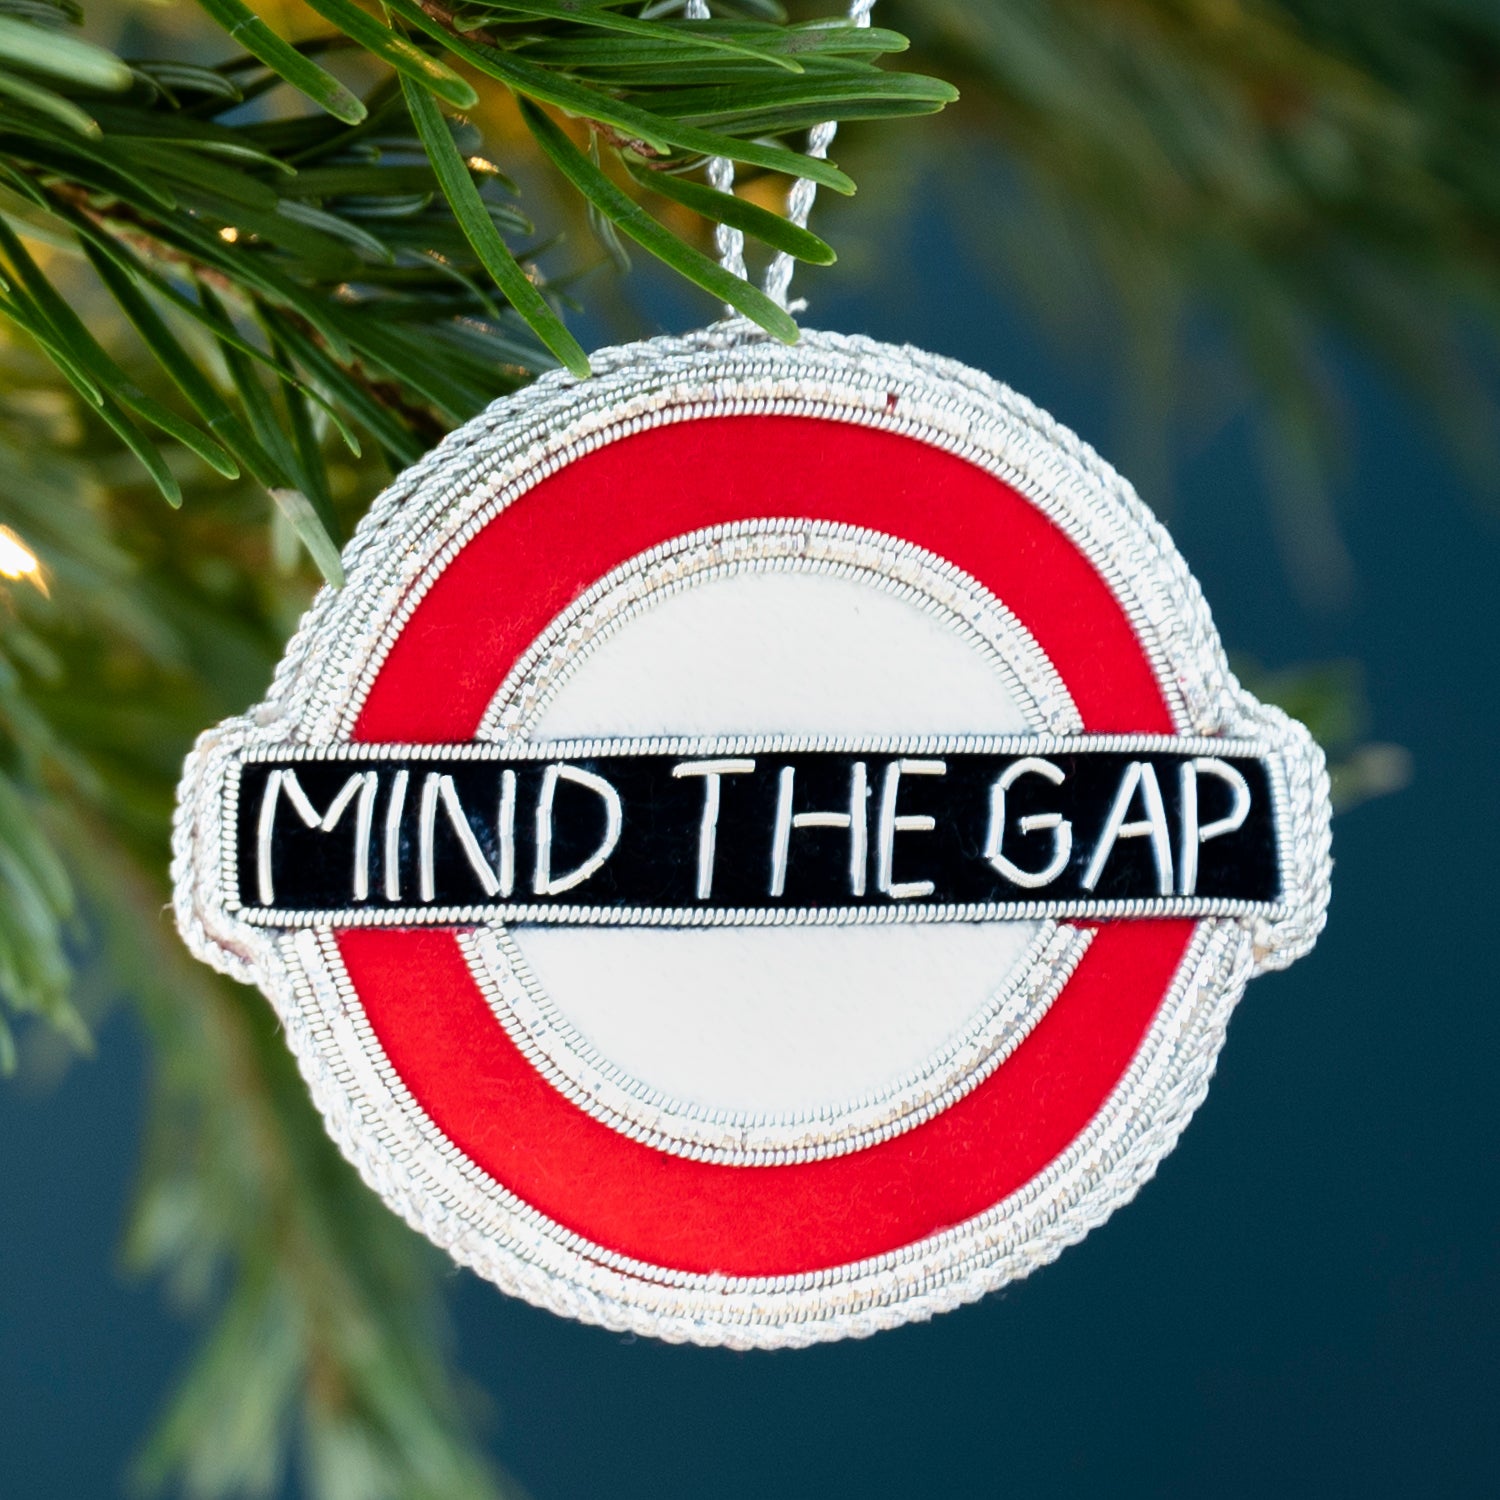 Stitched Mind The Gap decoration hanging from Christmas tree